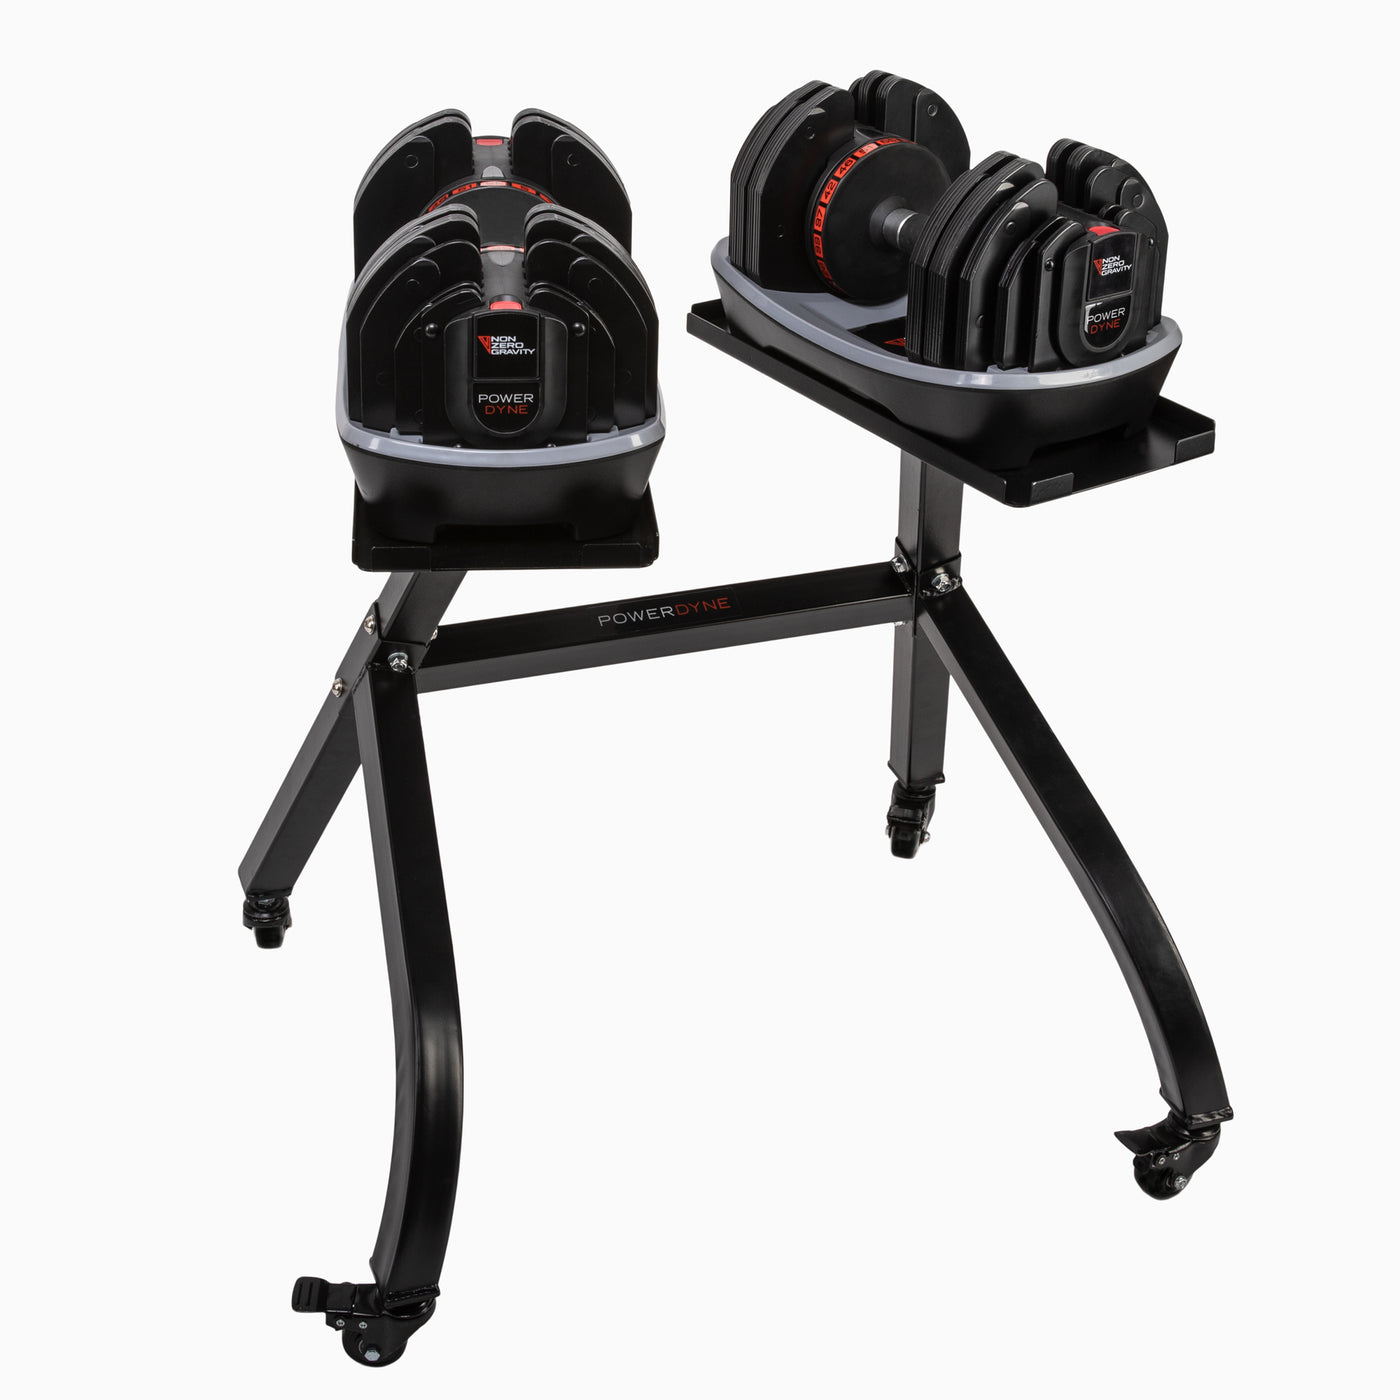 PowerDyne Adjustable Dumbbell Weight - Lift Up To 110lbs with At-Home Strength Training Equipment Combo